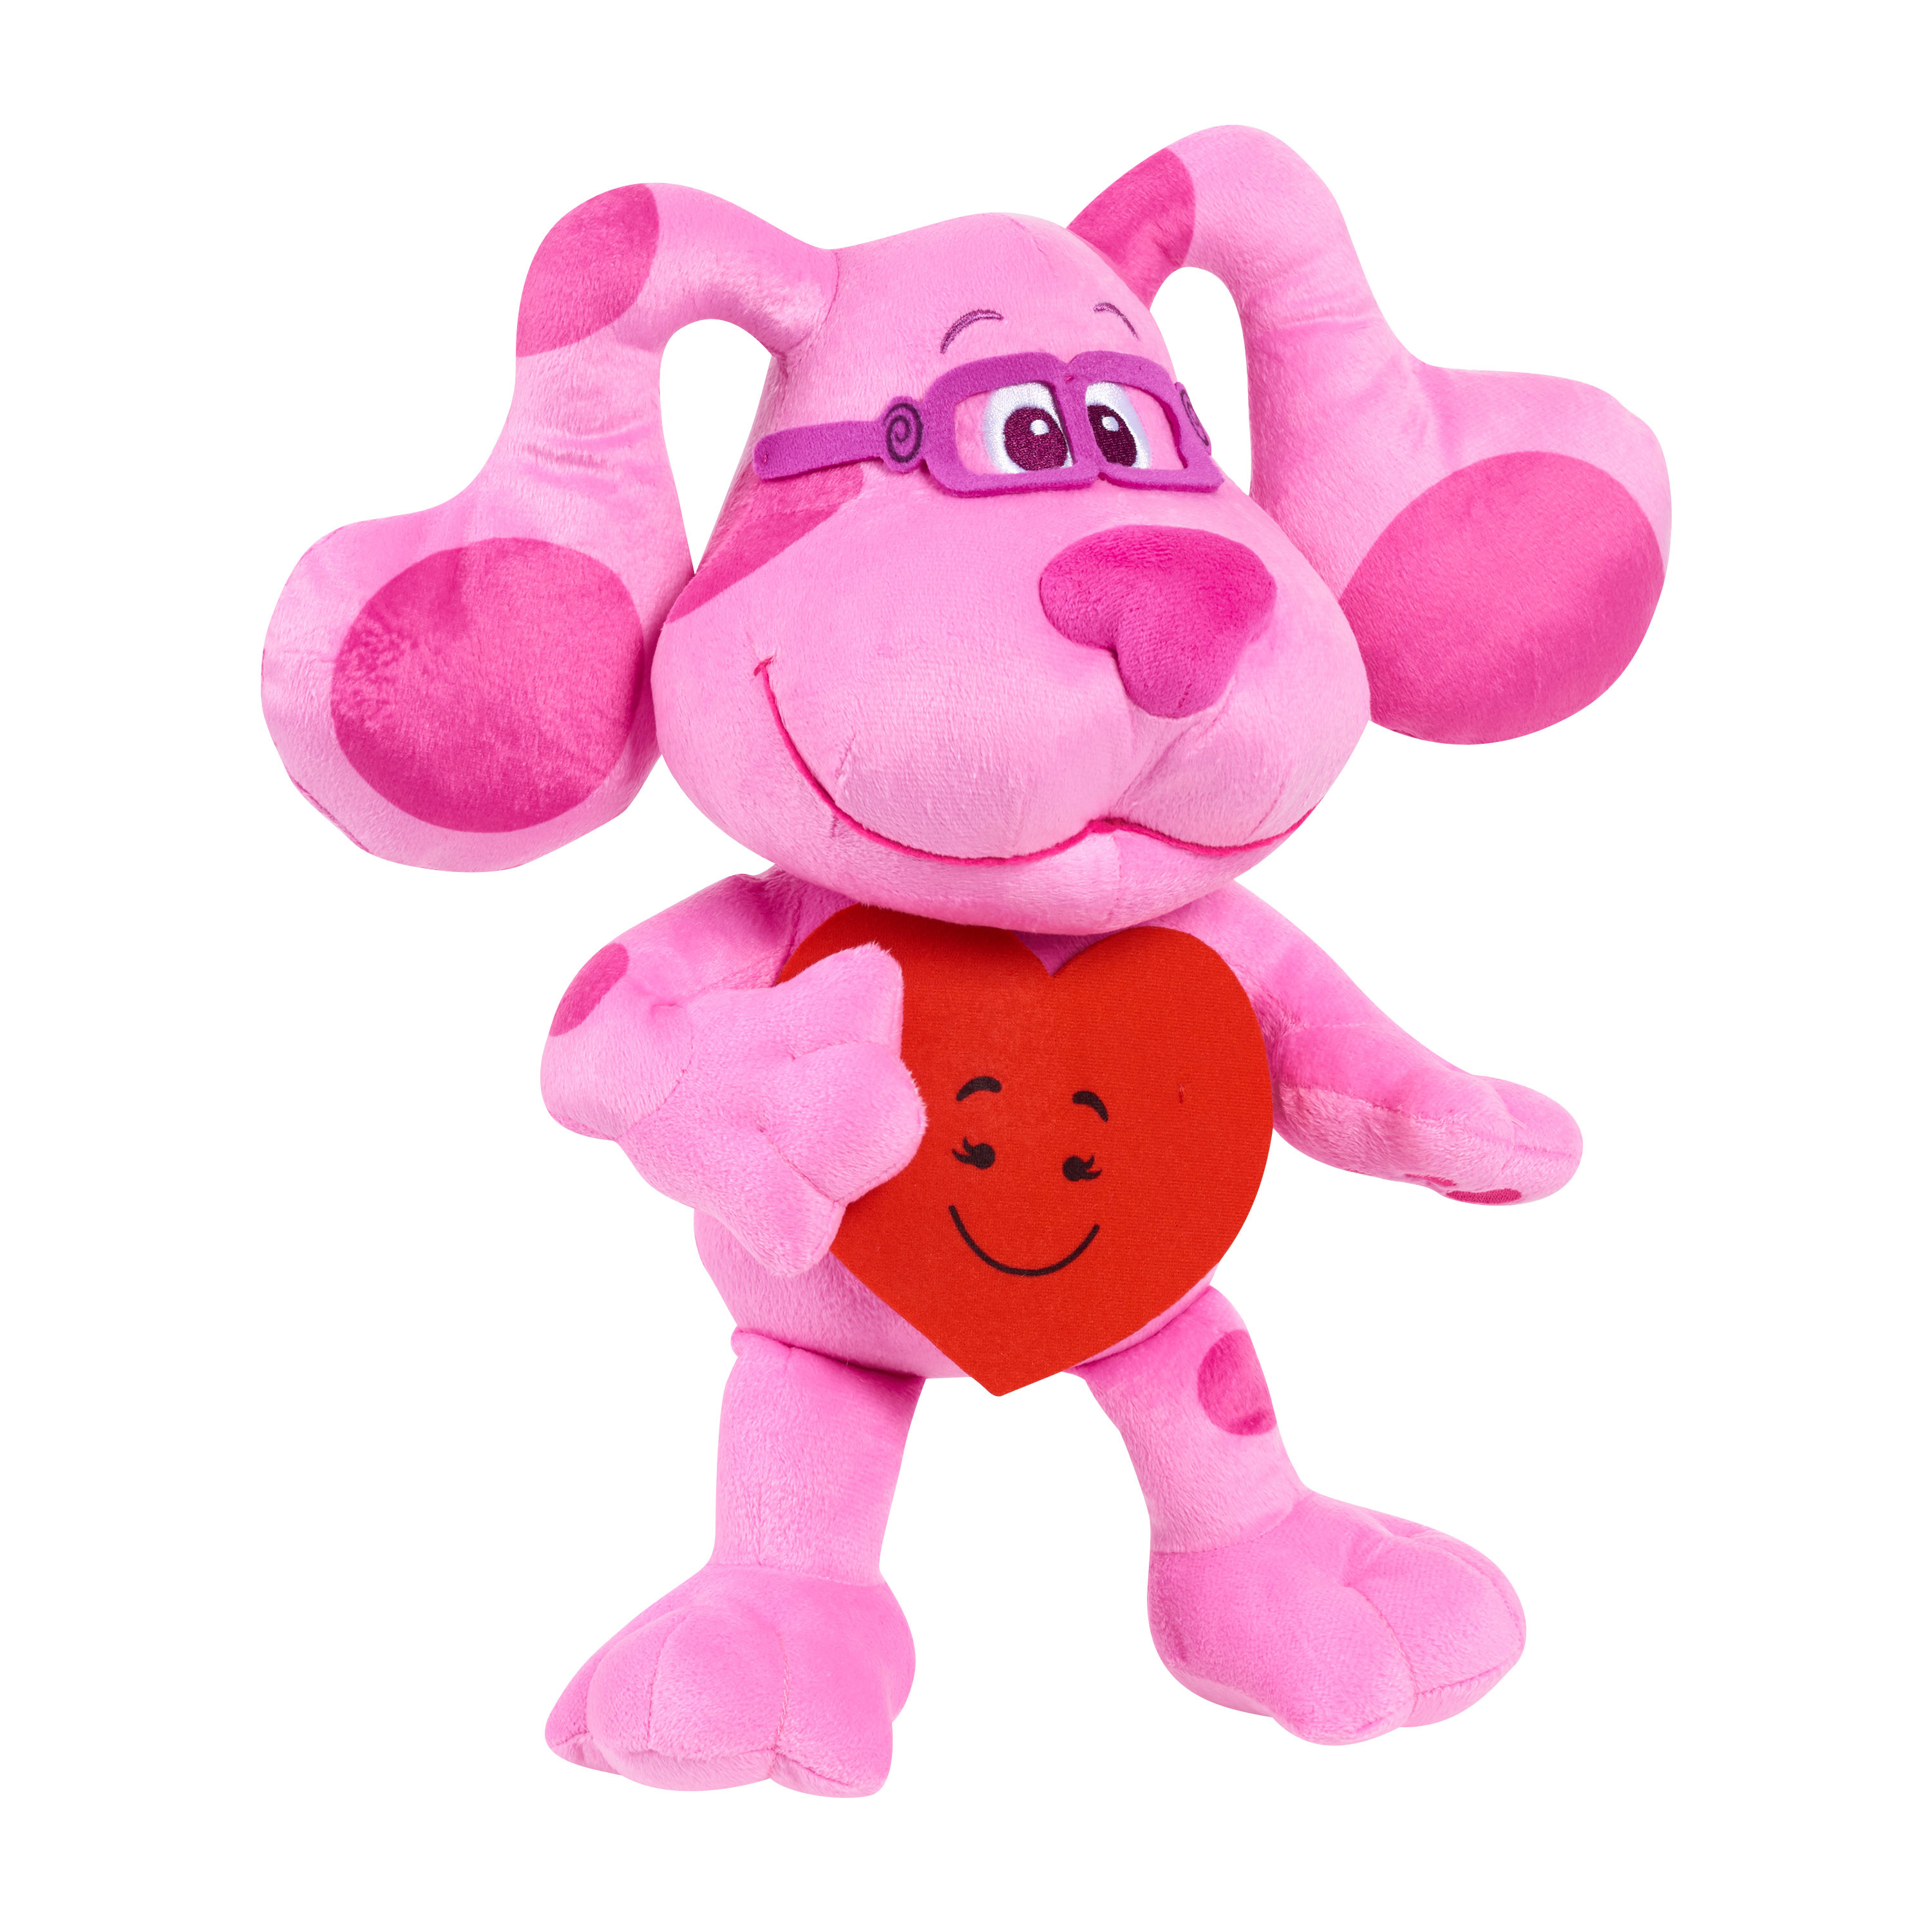 Blue’s Clues & You! Valentines Magenta, 12-inch Large Plush,  Kids Toys for Ages 3 Up, Gifts and Presents - image 3 of 3